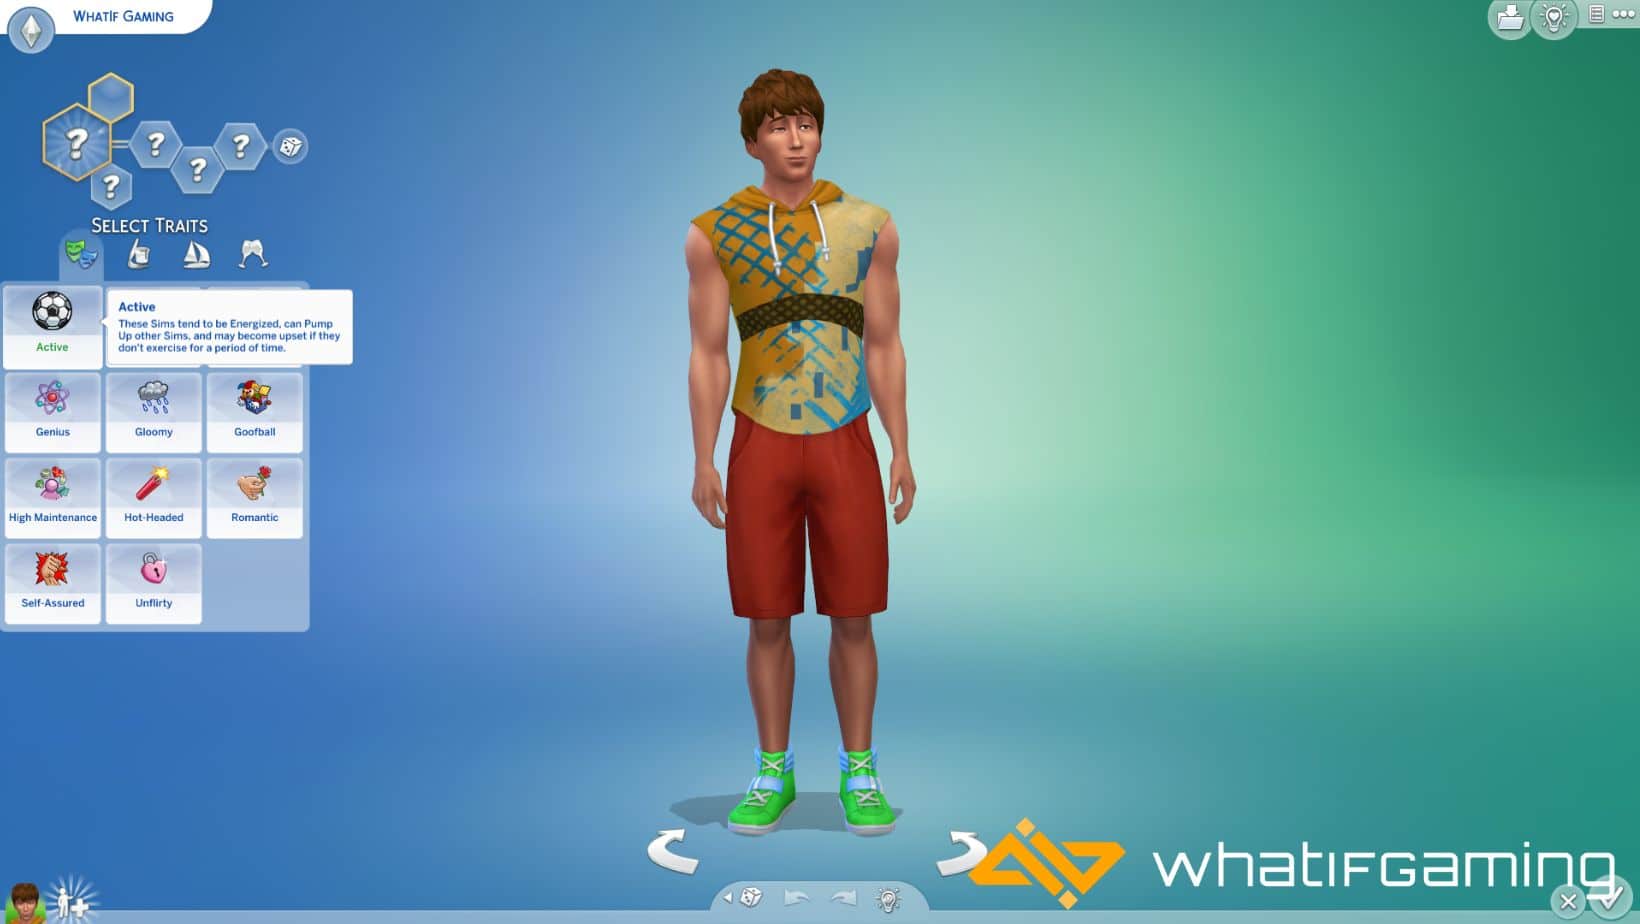 The Active trait allows your sim to get the Energized Moodlet which is quite useful.